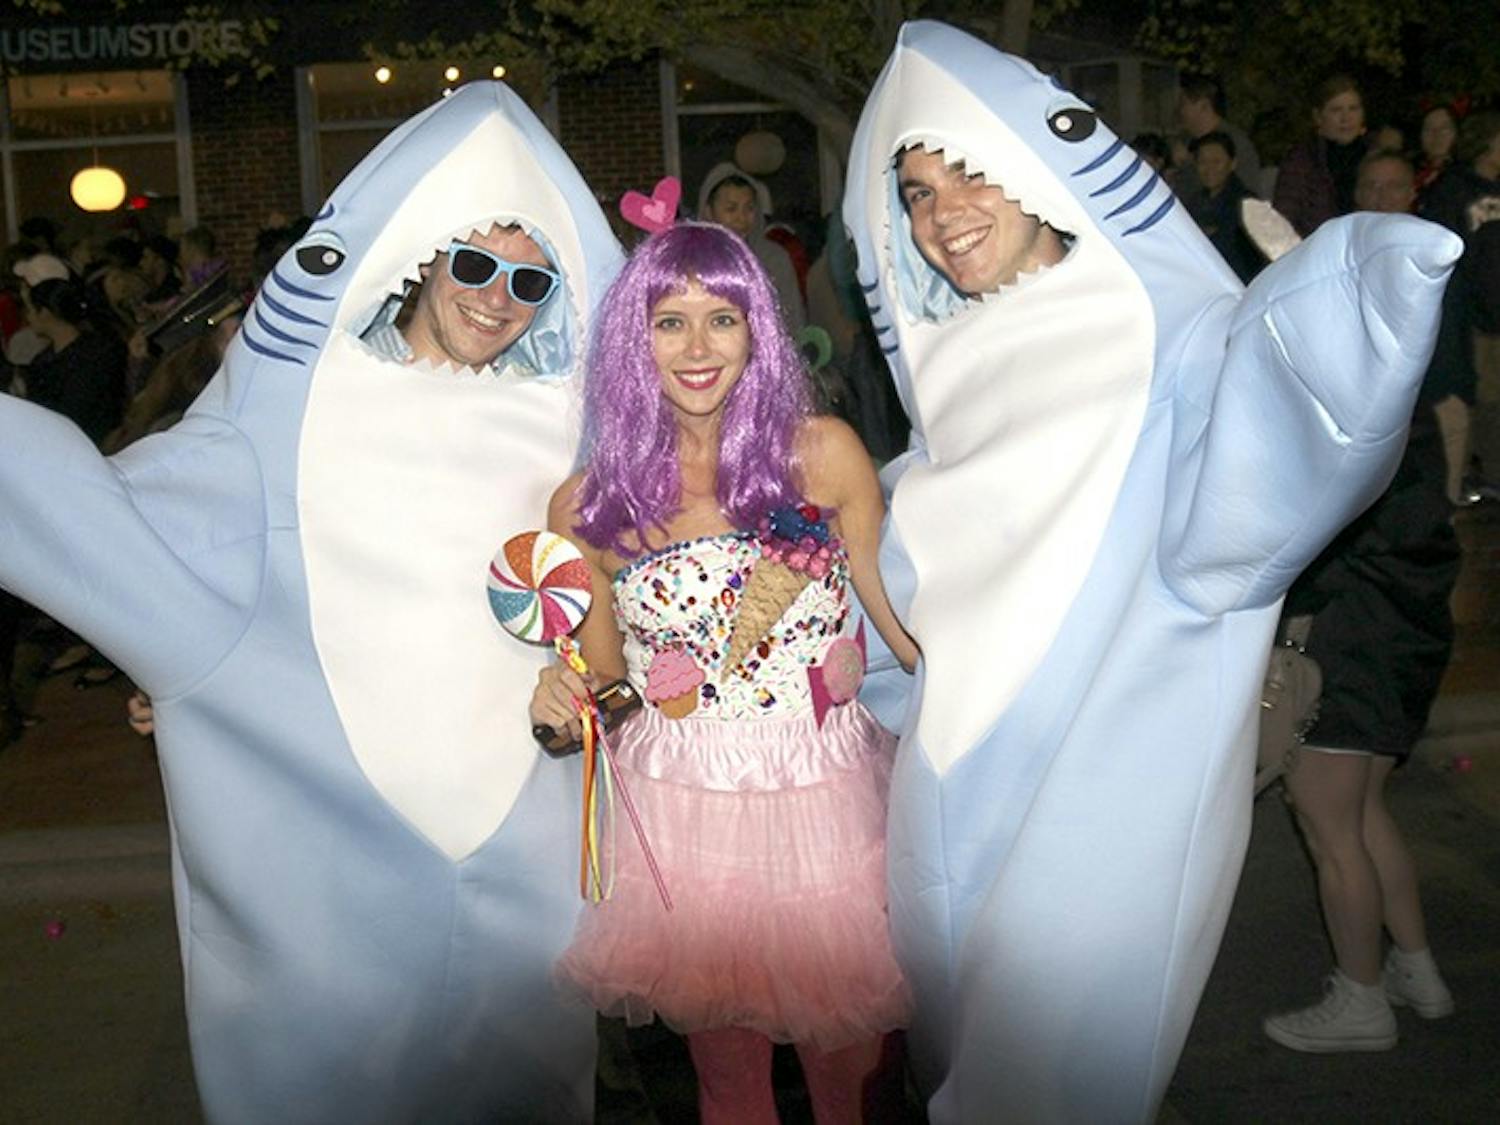 Halloween festivities on Franklin Senior Gary allen (Exercise of Sports), Holli Mattocks from Durham and Freshman Josh Mattocks (Biology and Philosophy double major) dressed up as Katy Perry and her two shark dancers from her 2015 Super Bowl performance.